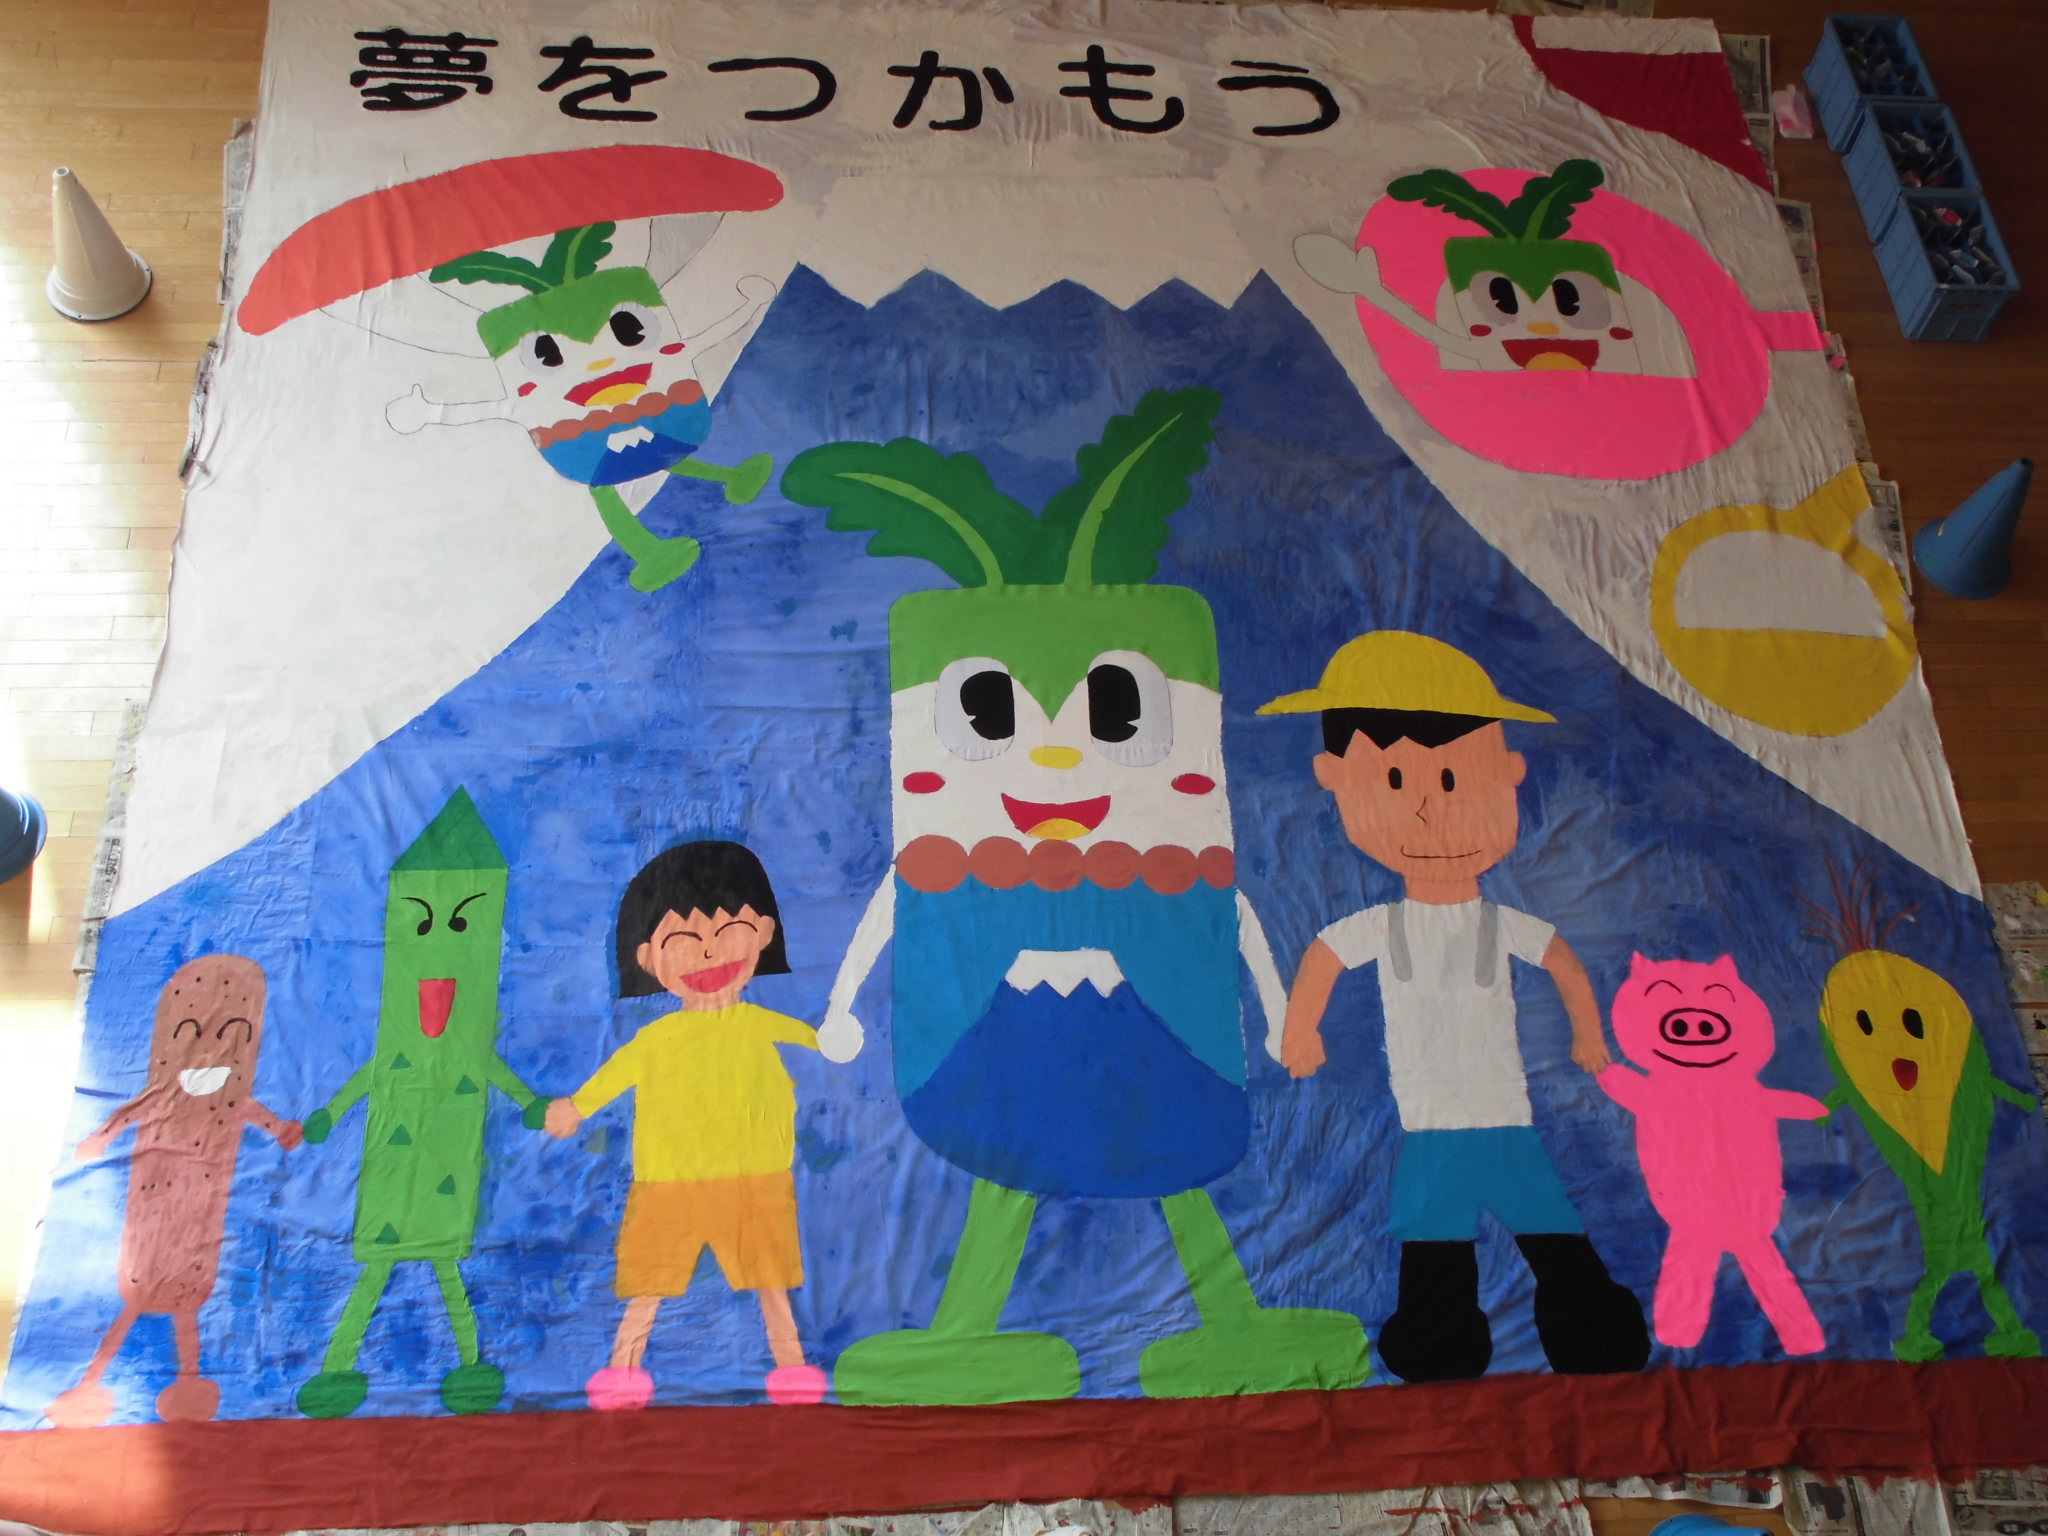 The Biggest Painting in the World 2020 Rusutsu Village was completed